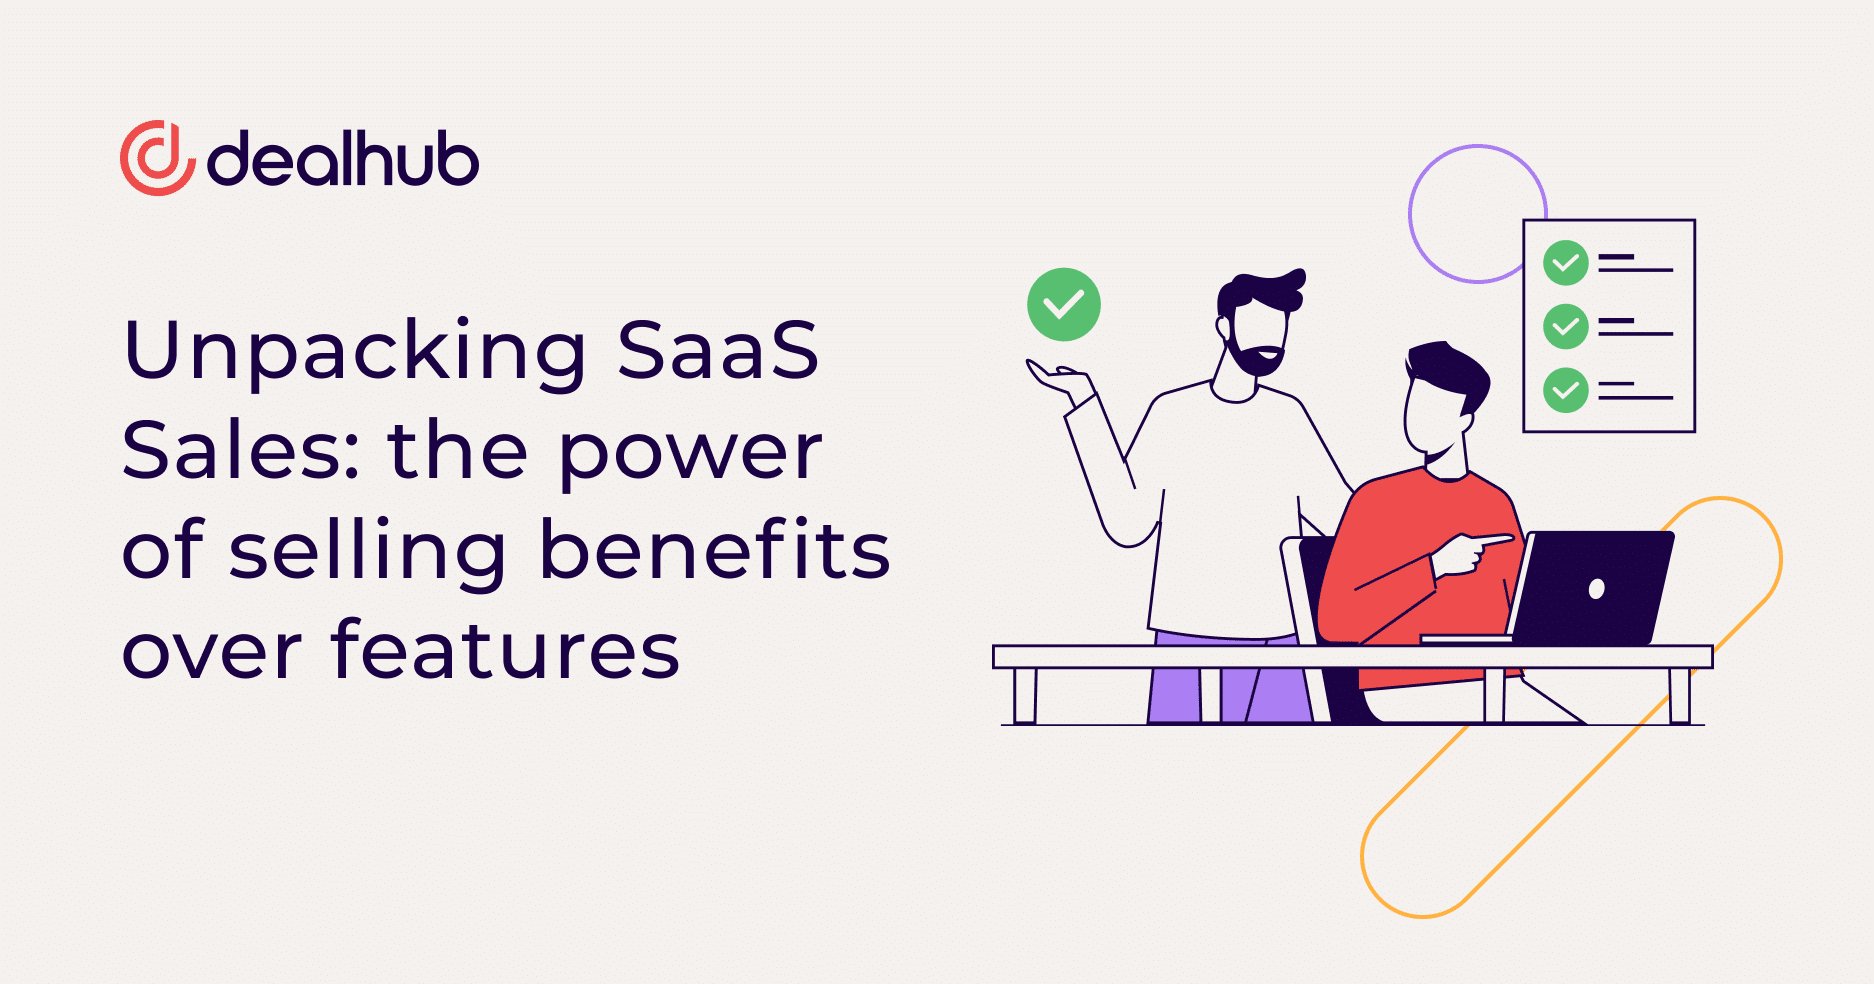 Unpacking SaaS Sales: the power of selling benefits over features